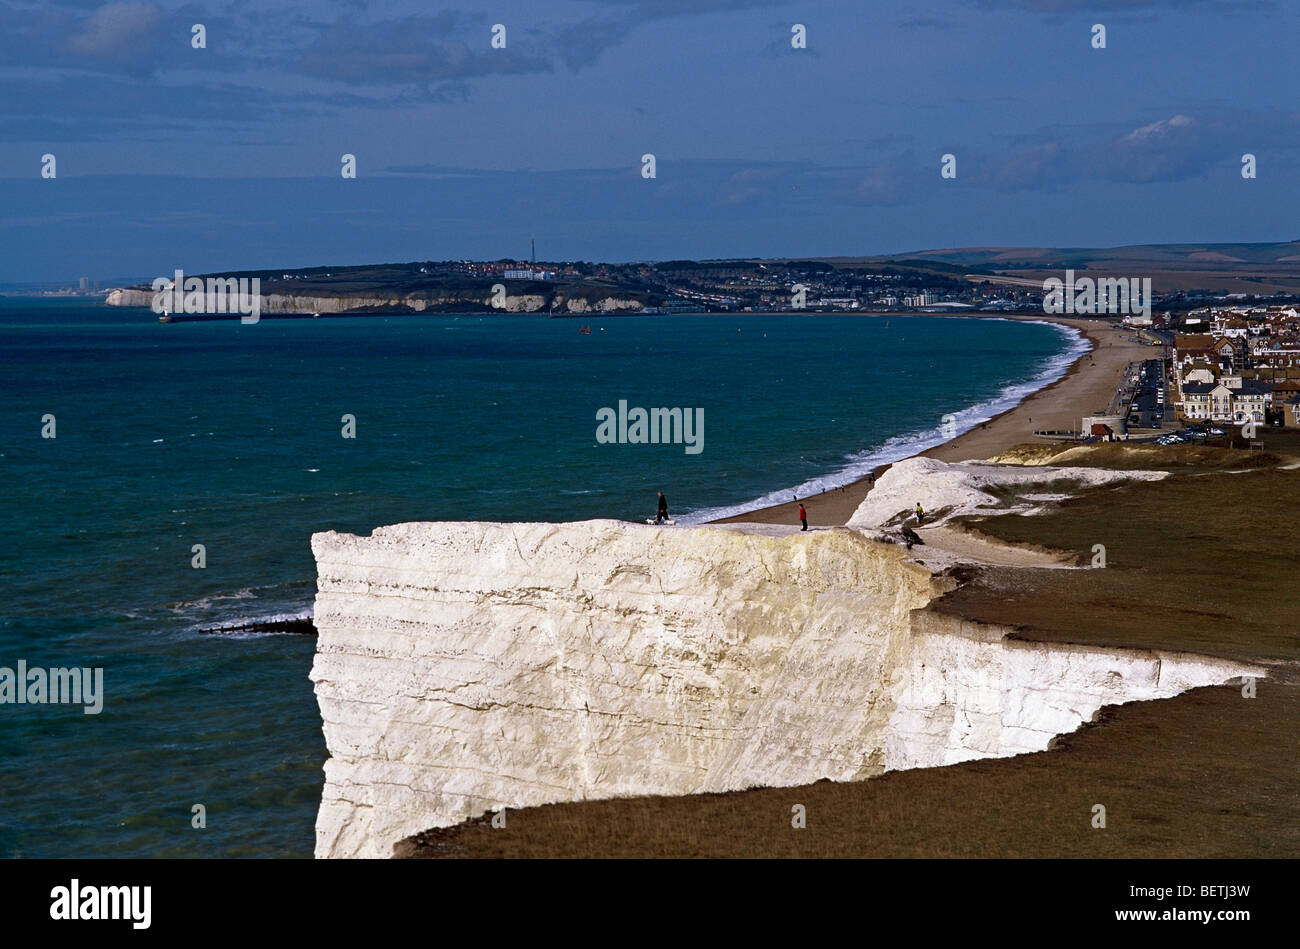 Looking West from Seaford Head across the beach and promenade of Seaford towards Newhaven and the Telscombe Cliffs Stock Photo